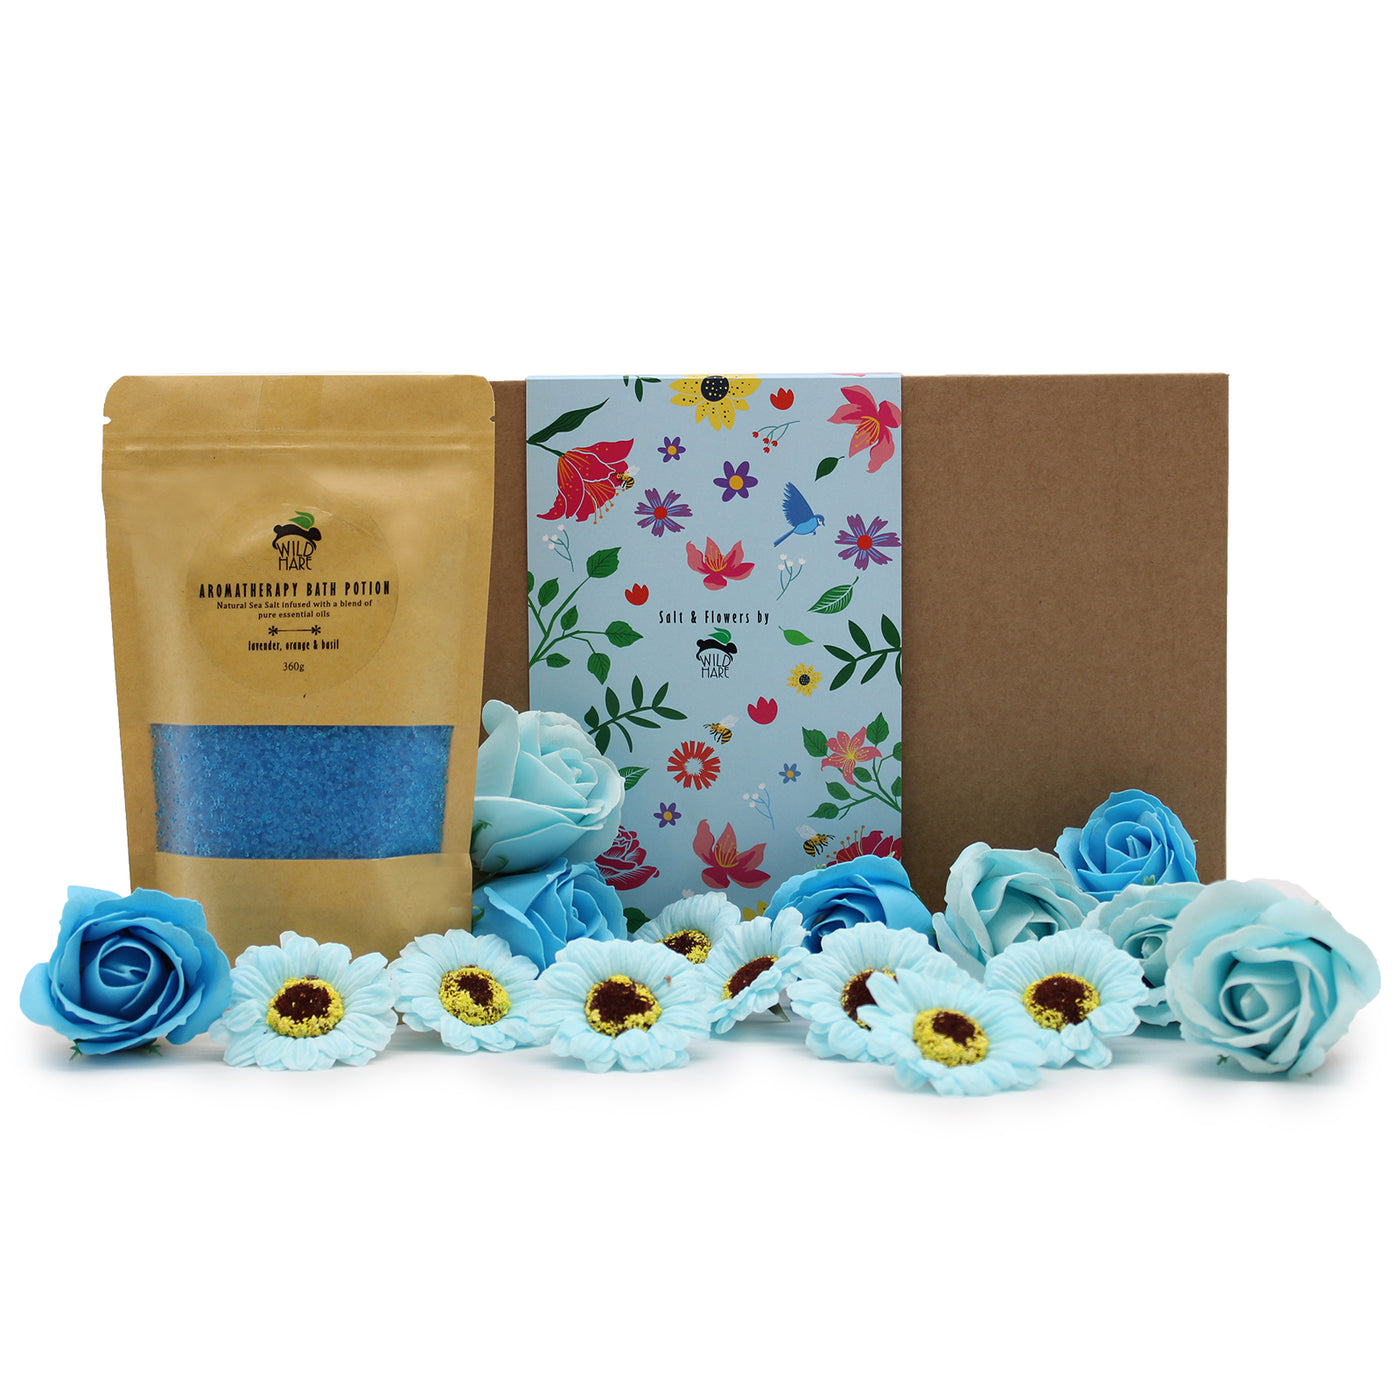 Wild Hare Salt & Flowers Bath Gift Set With Blue Roses And Sunflowers.